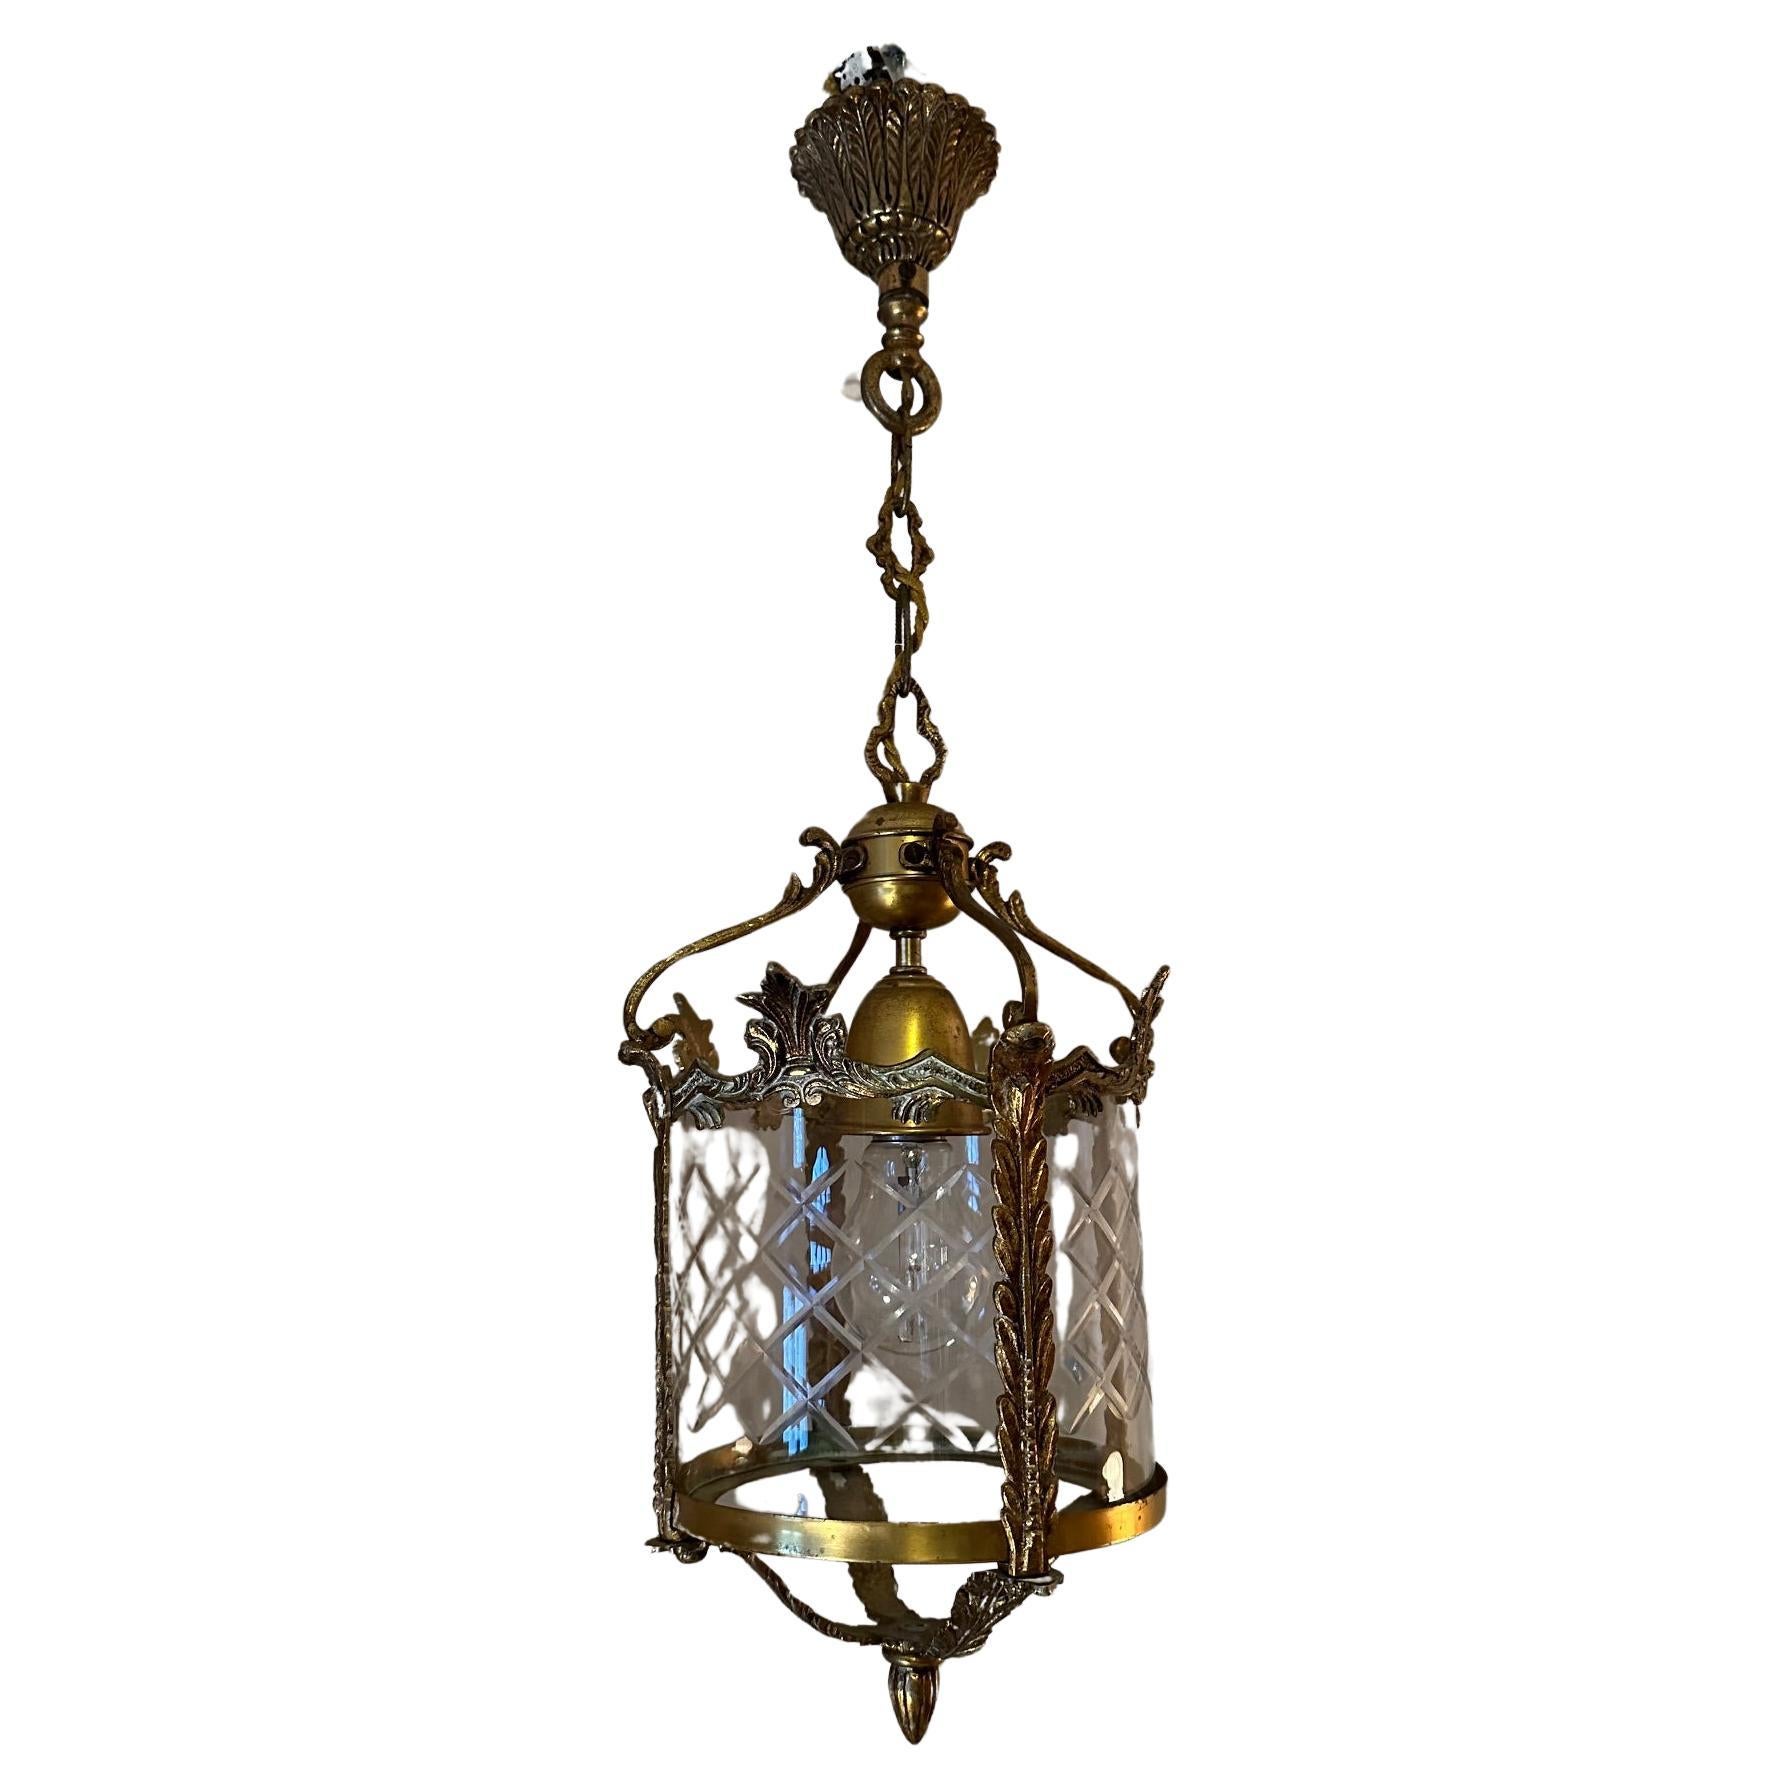 20th century French Glass and Bronze Pendant